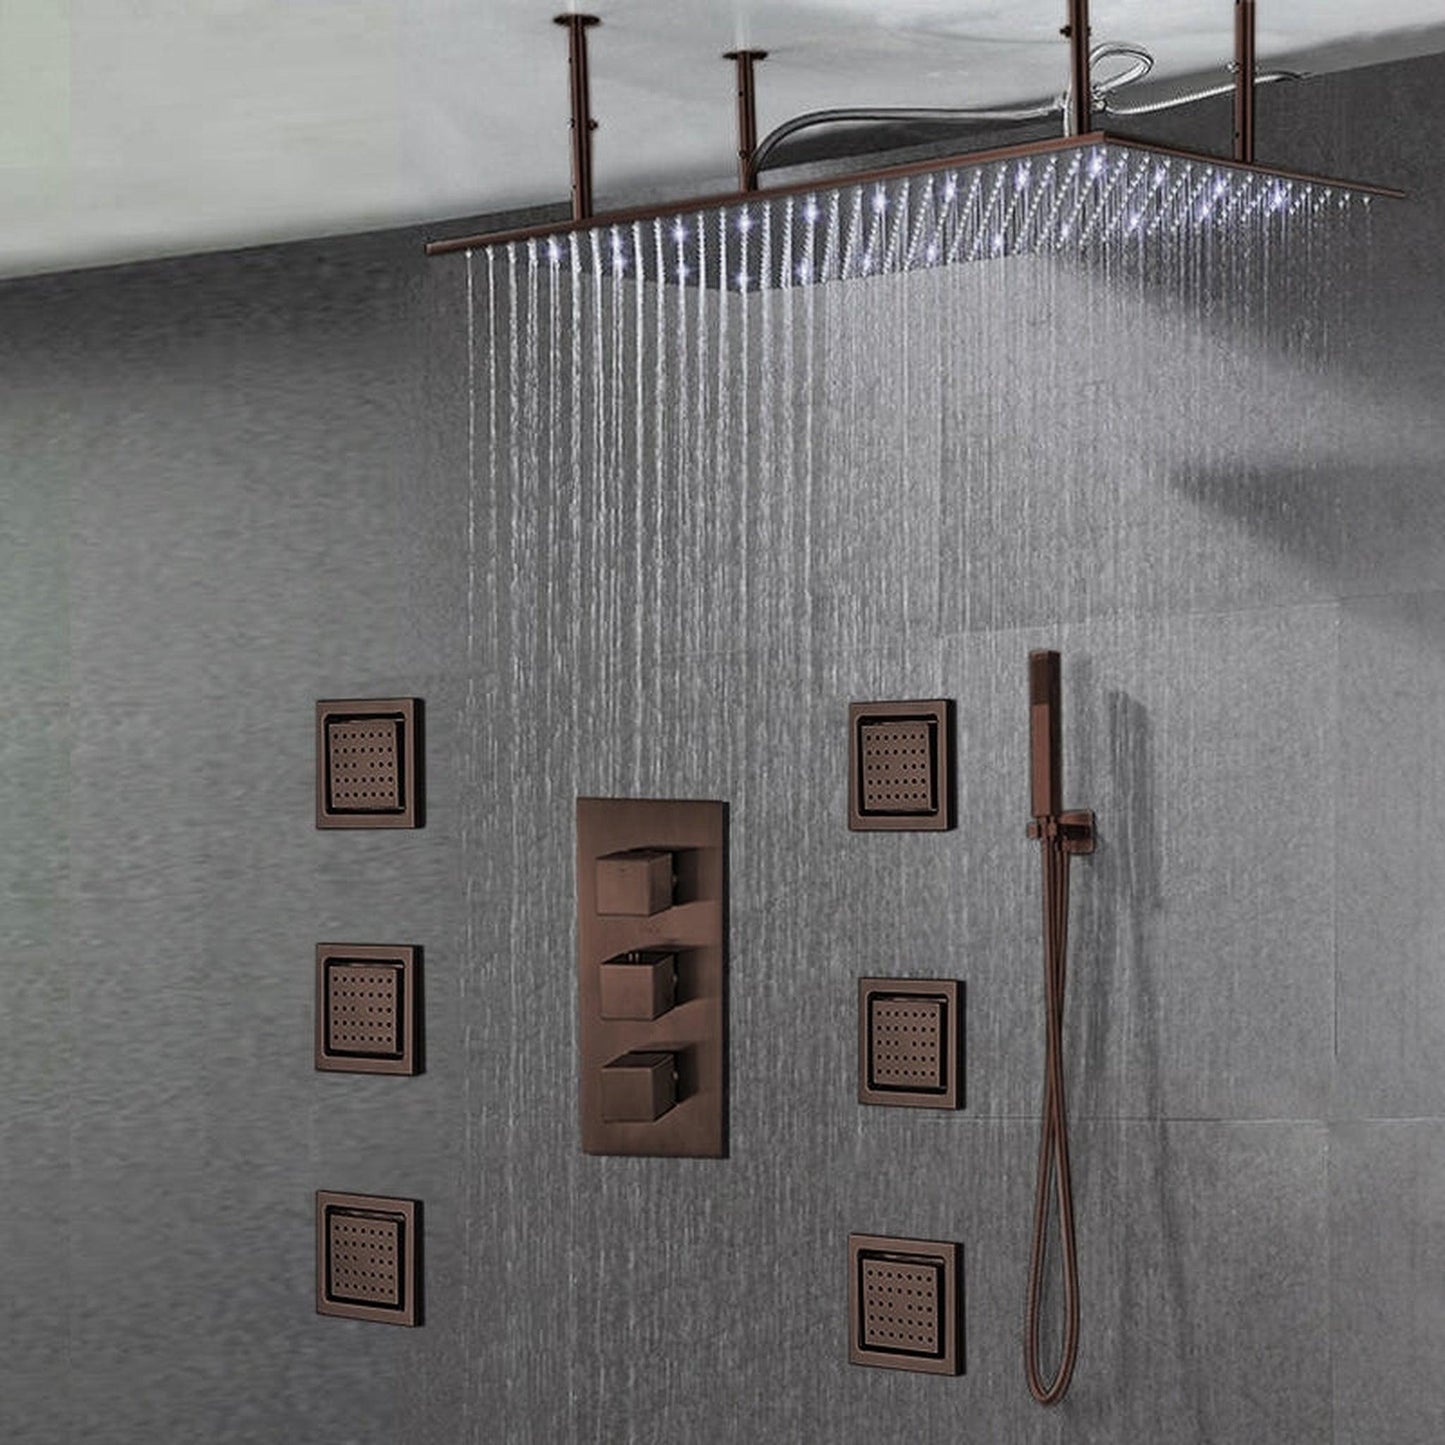 Fontana Martinique Creative Luxury Large Light Oil Rubbed Bronze Rectangular Ceiling Mounted LED Solid Brass Shower Head Rain Shower System With 6-Jet Body Sprays and Hand Shower